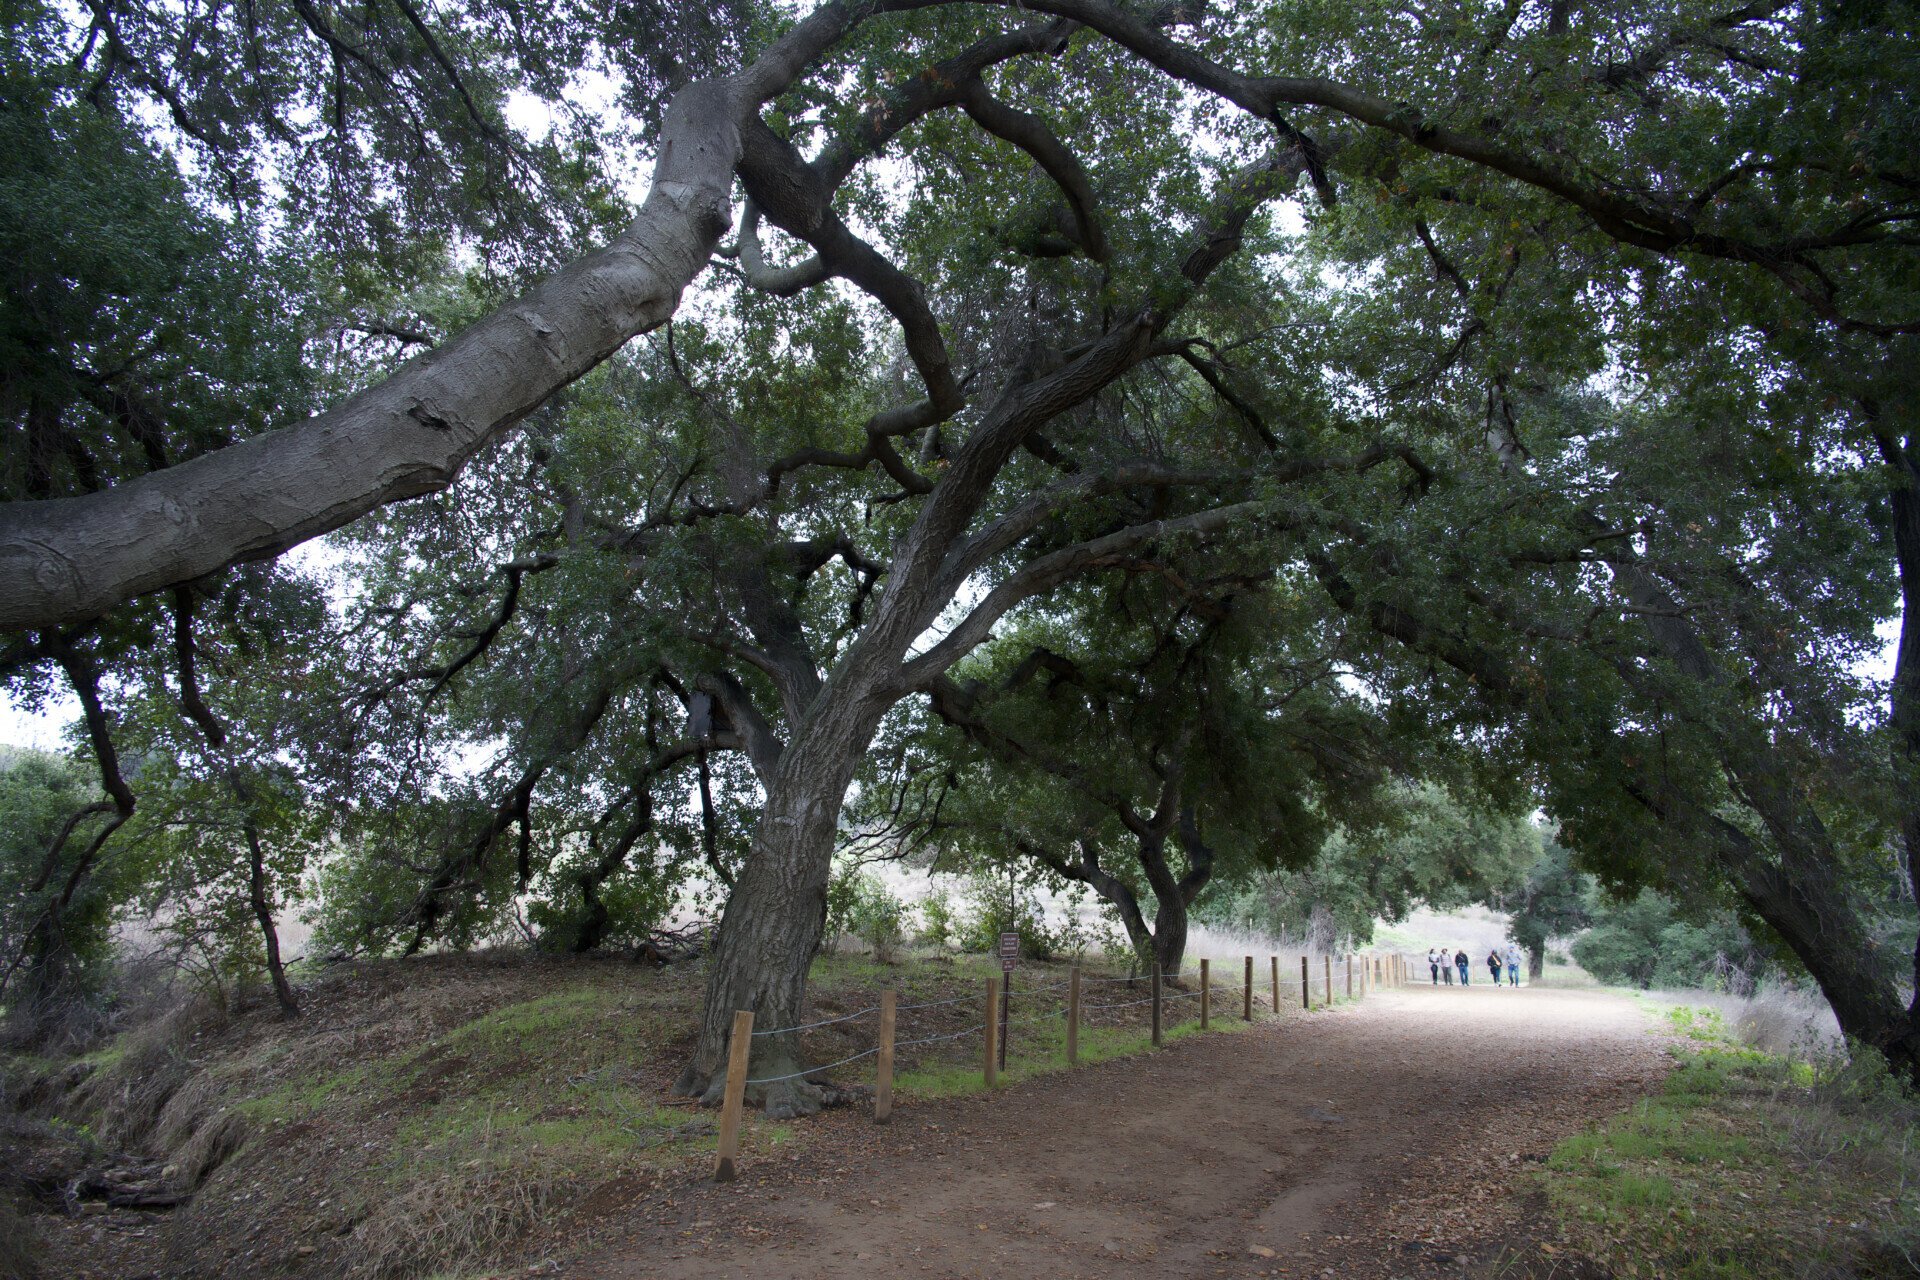 Four hikers in single file walking on a tranquil dirt path under the canopy of towering oak trees in Malibu Creek State Park.